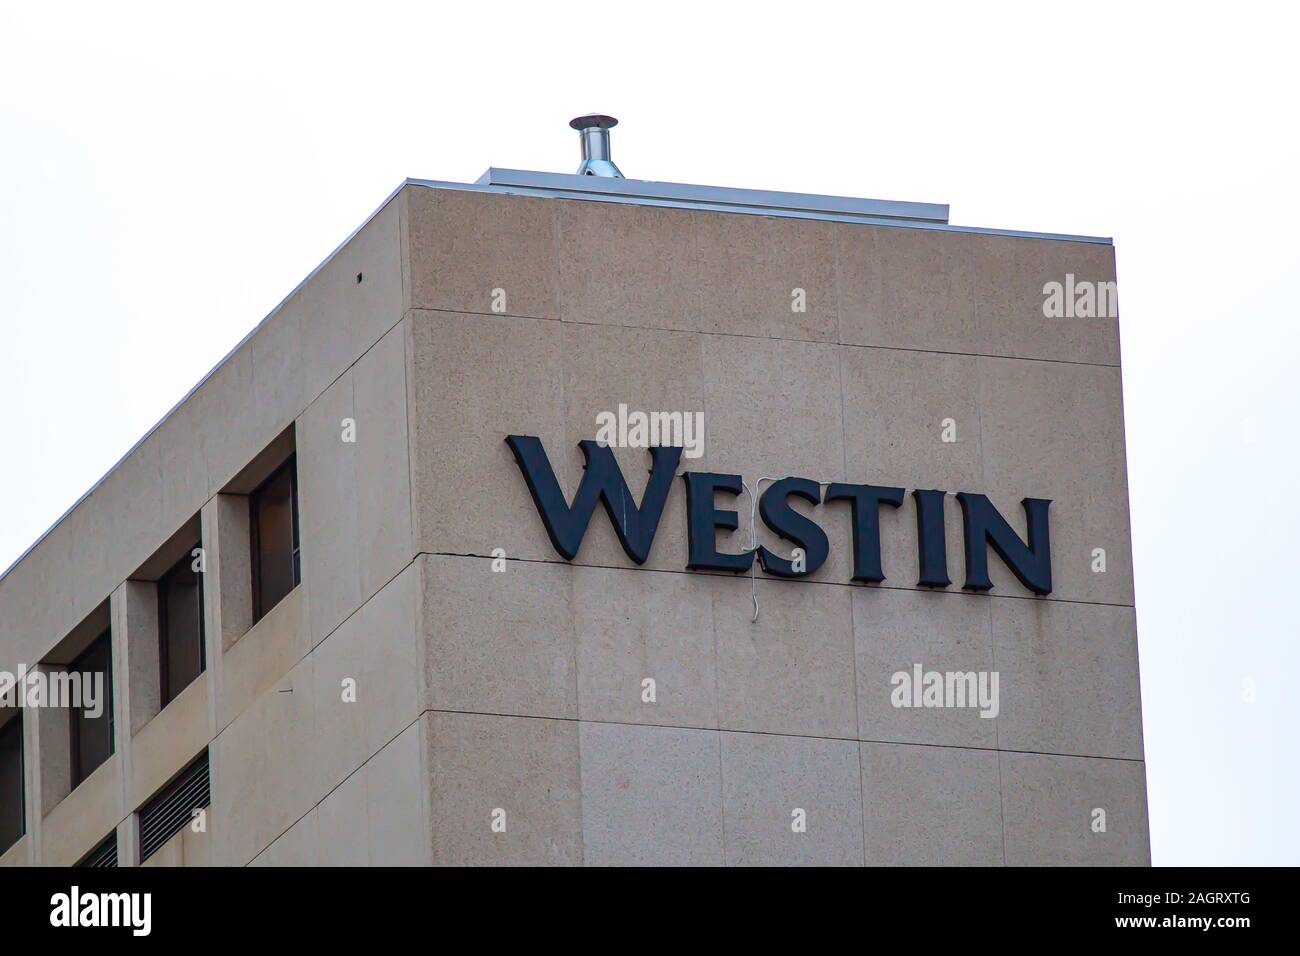 Calgary, Alberta. Canada Dec 20 2019. The Westin hotel top sign from a building. Unionized workers launch walkout at The Westin Hotels. Illustrative Stock Photo